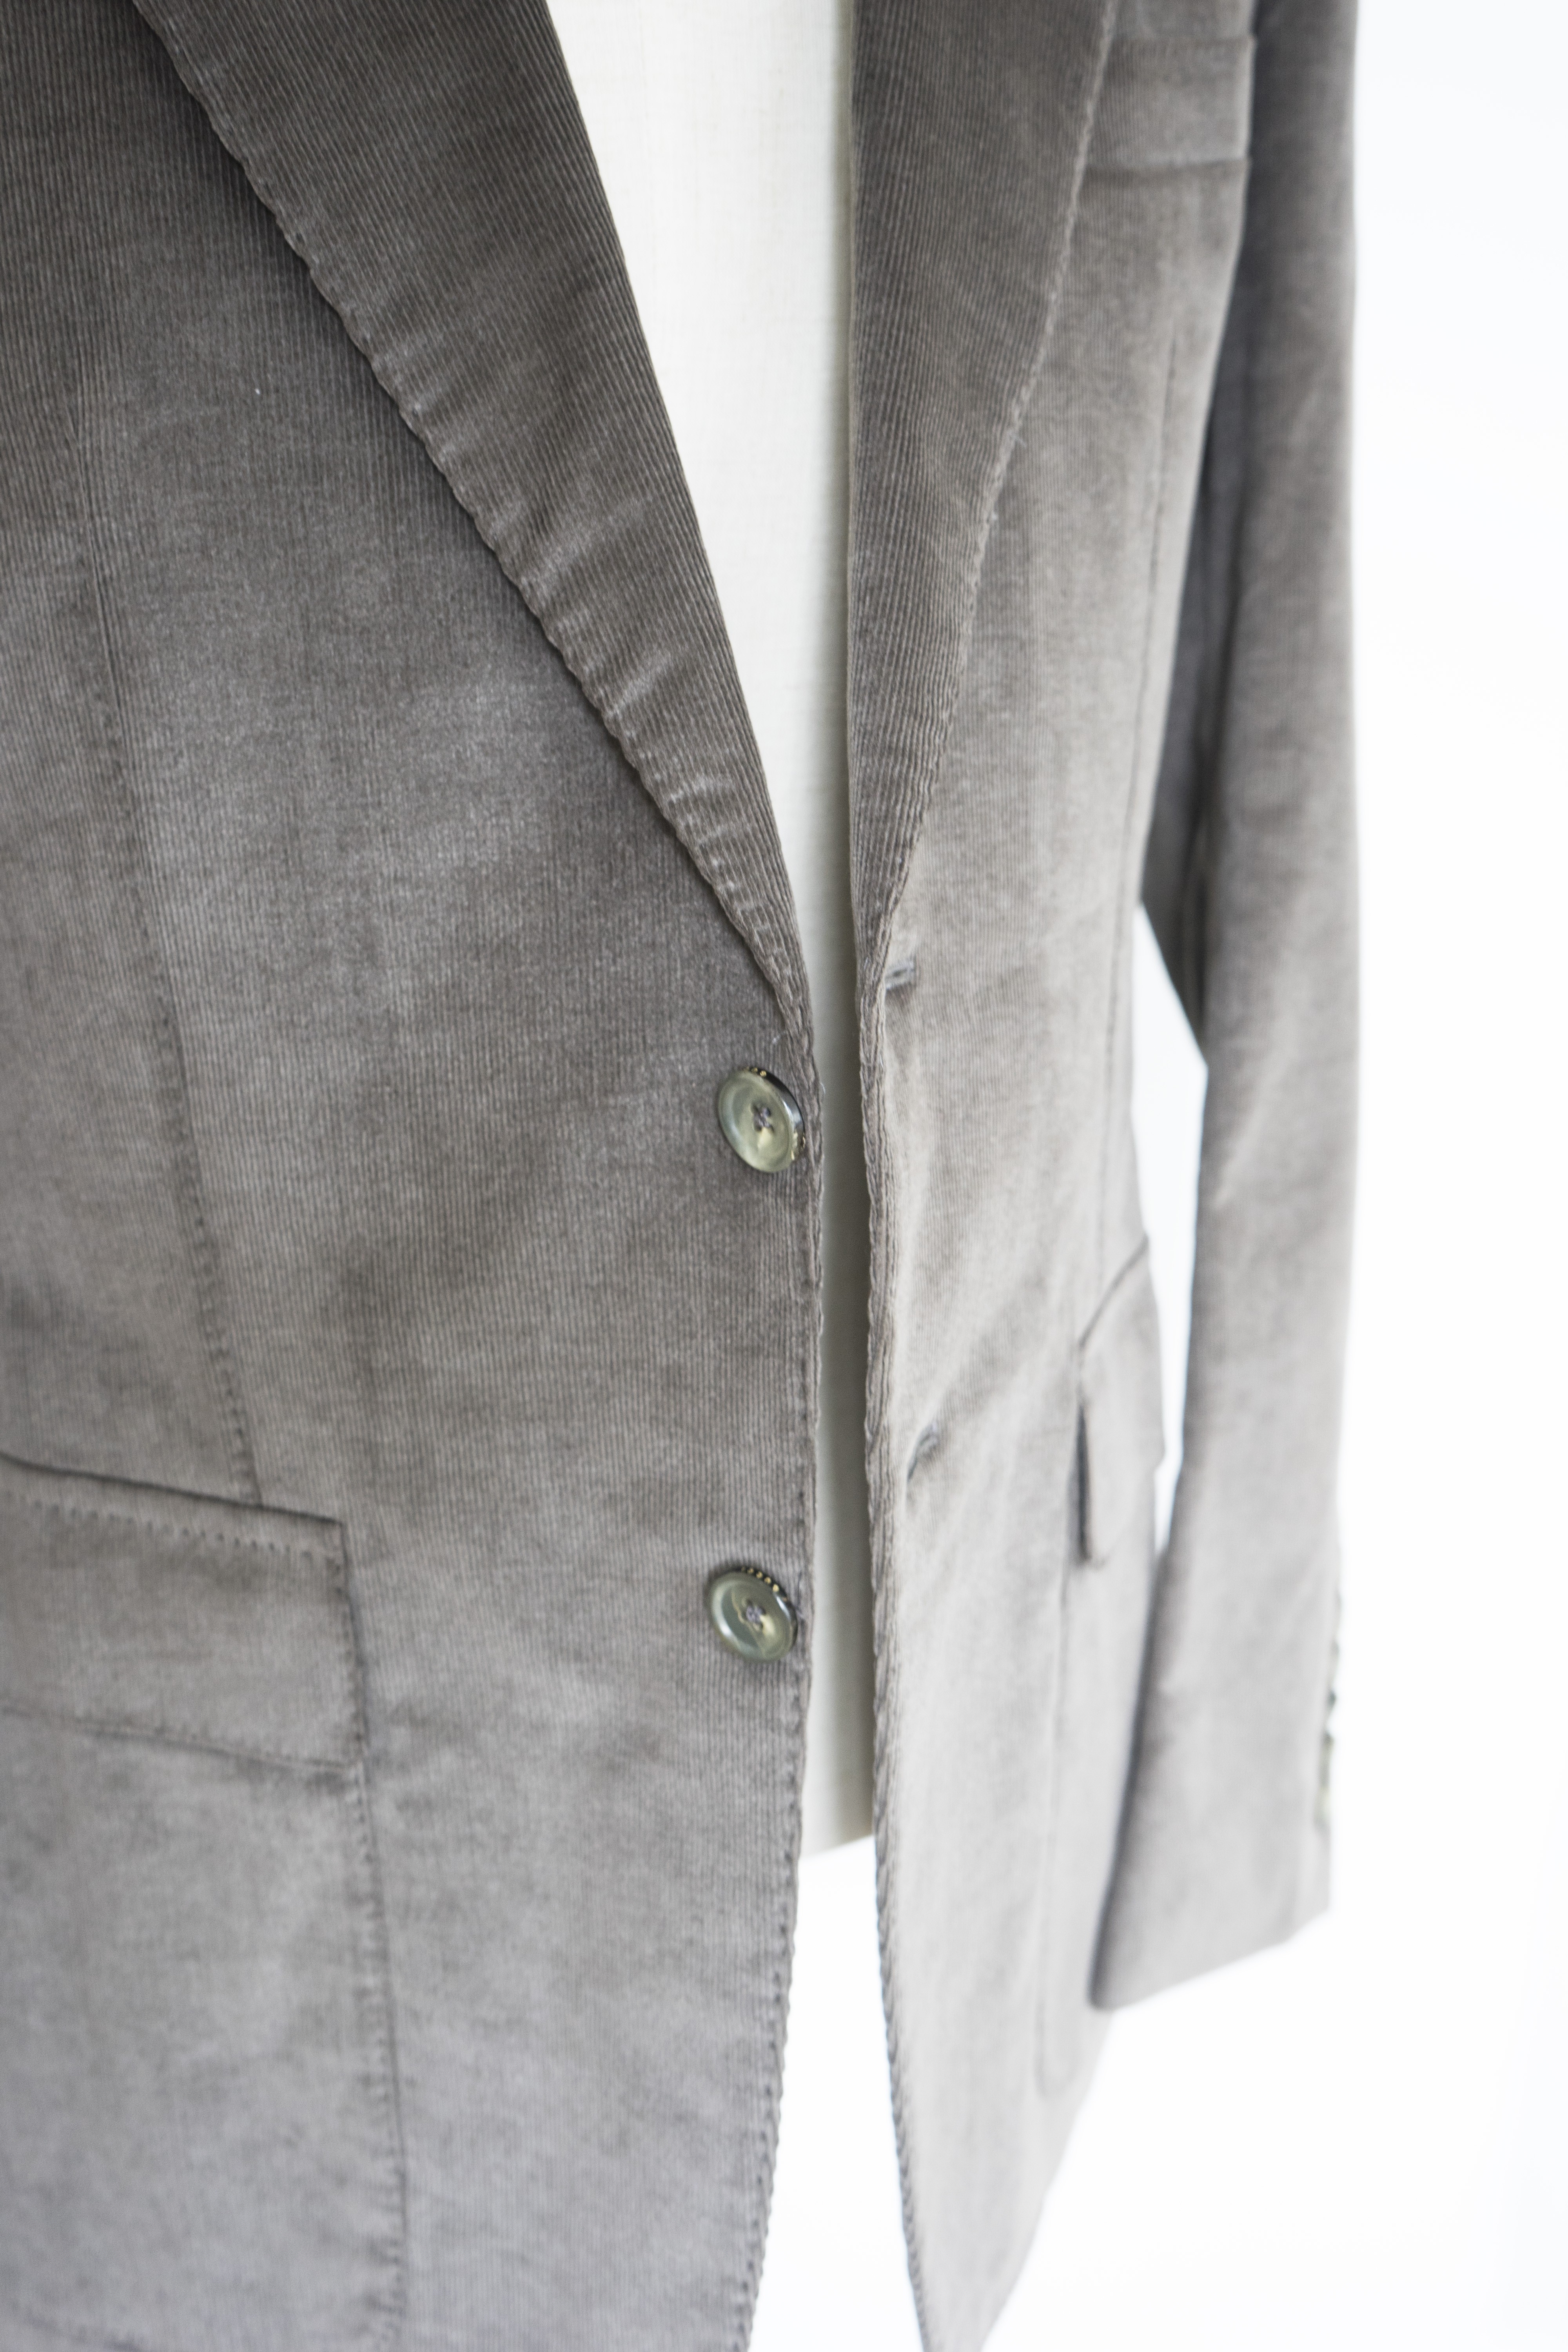 Afazzy Mens Grey Chenille Texture Wrinkle Resistant 2 Button Work Casual Blazer 